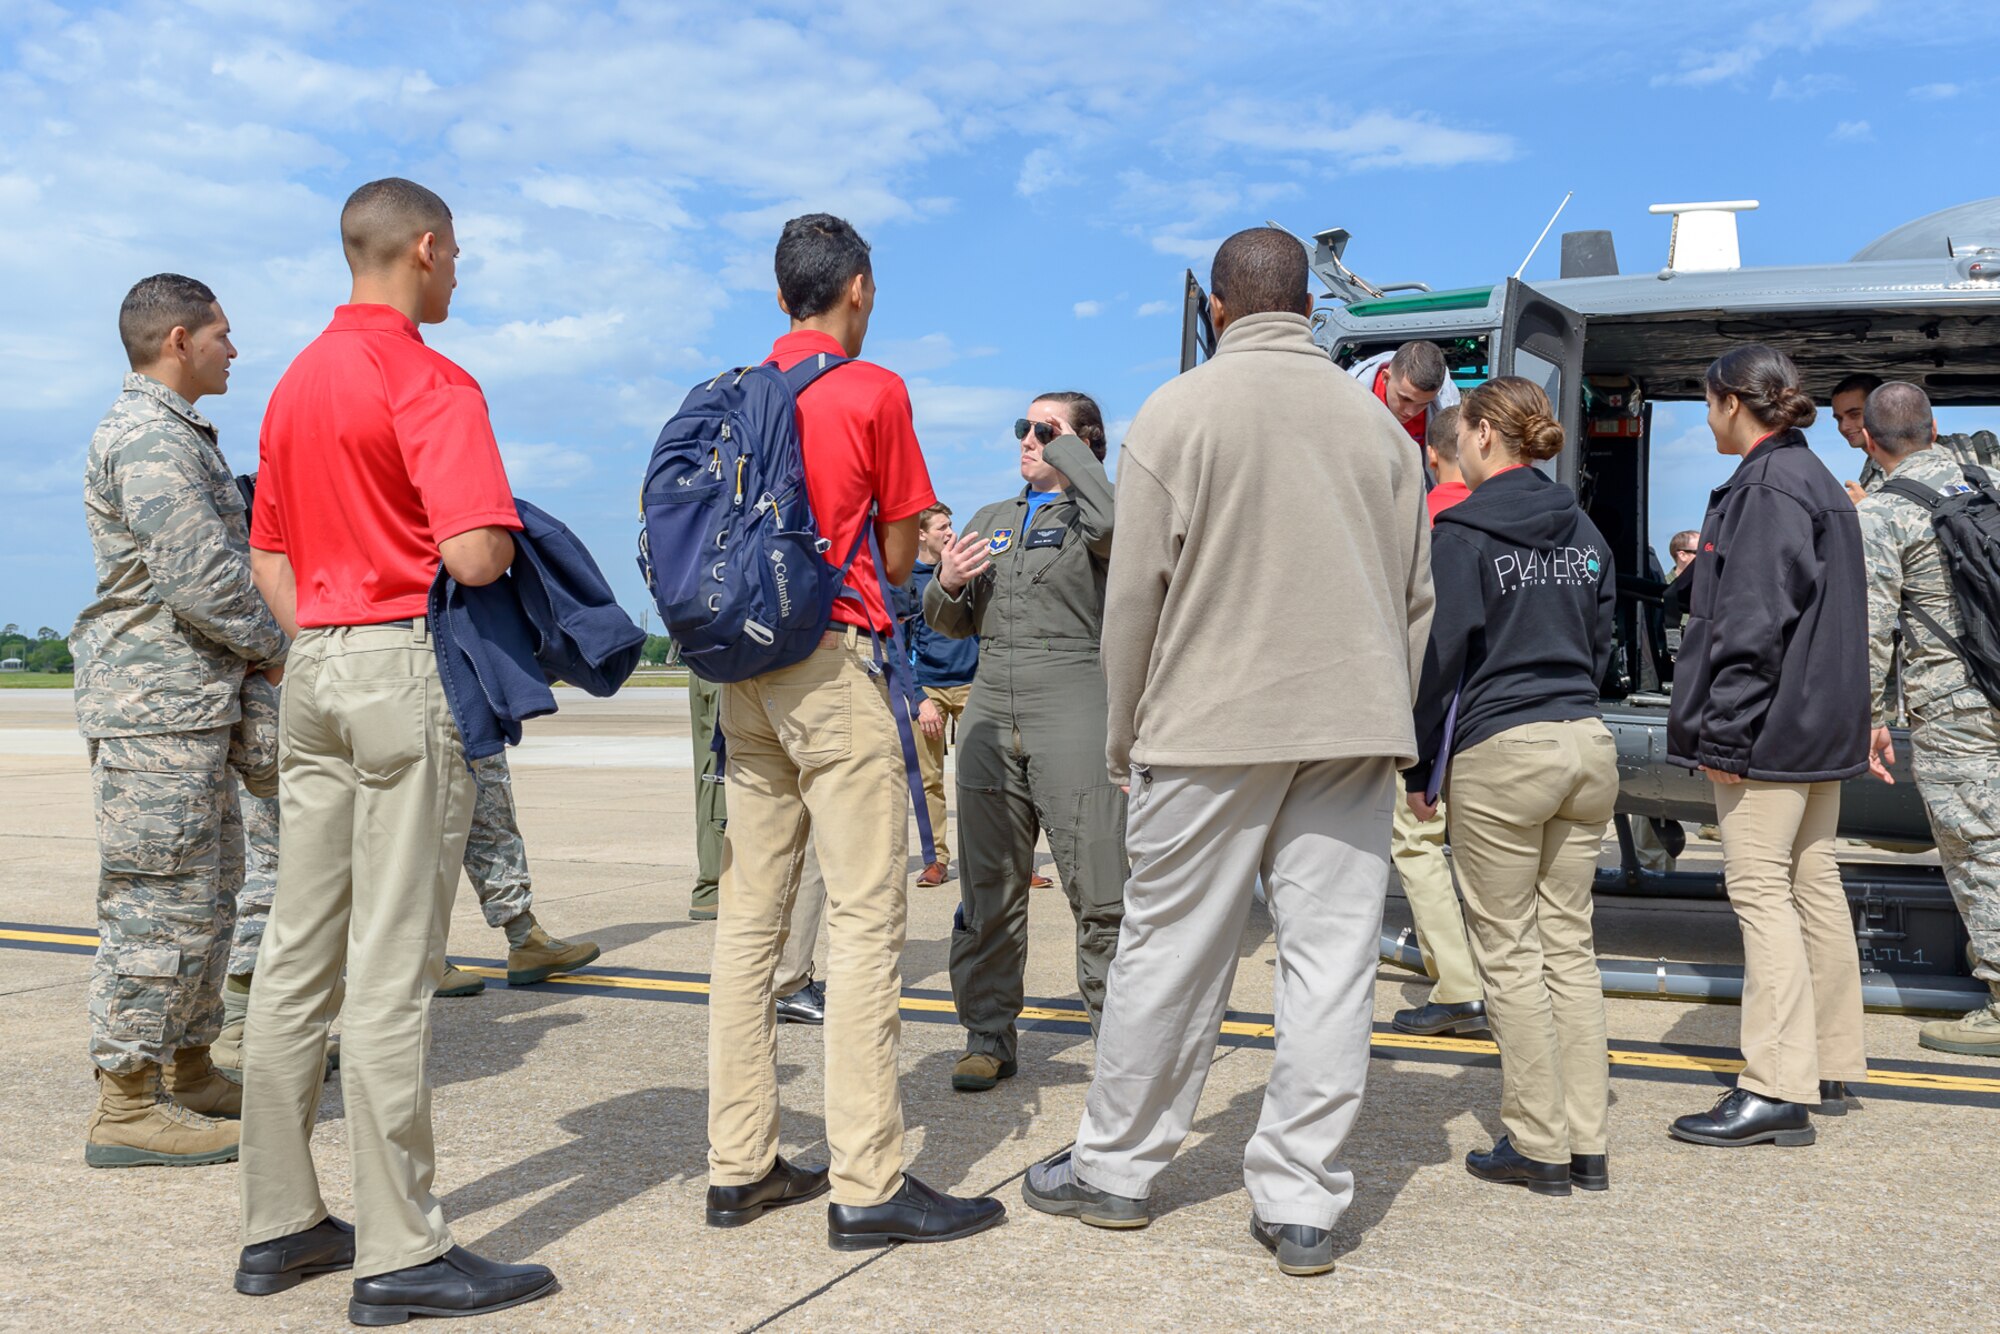 U.S. Air Force 2nd Lt. Rachel Matson, 23rd Flying Training Squadron pilot, Fort Rucker, Alabama, talks to Air Force ROTC cadets from the University of Puerto Rico, Pio Piedras, about flight operations during Pathways to Blue April 6, 2018, on Keesler Air Force Base, Mississippi. Cadets received an orientation flight along with hands-on briefings on technical and flying operations in support of the Air Force’s Diversity Strategic Roadmap program. Keesler was home to 280 cadets from 15 universities April 6-7 as part of Pathways to Blue, a diversity outreach event hosted by the 2nd Air Force.  (U.S. Air Force photo by Andre’ Askew)